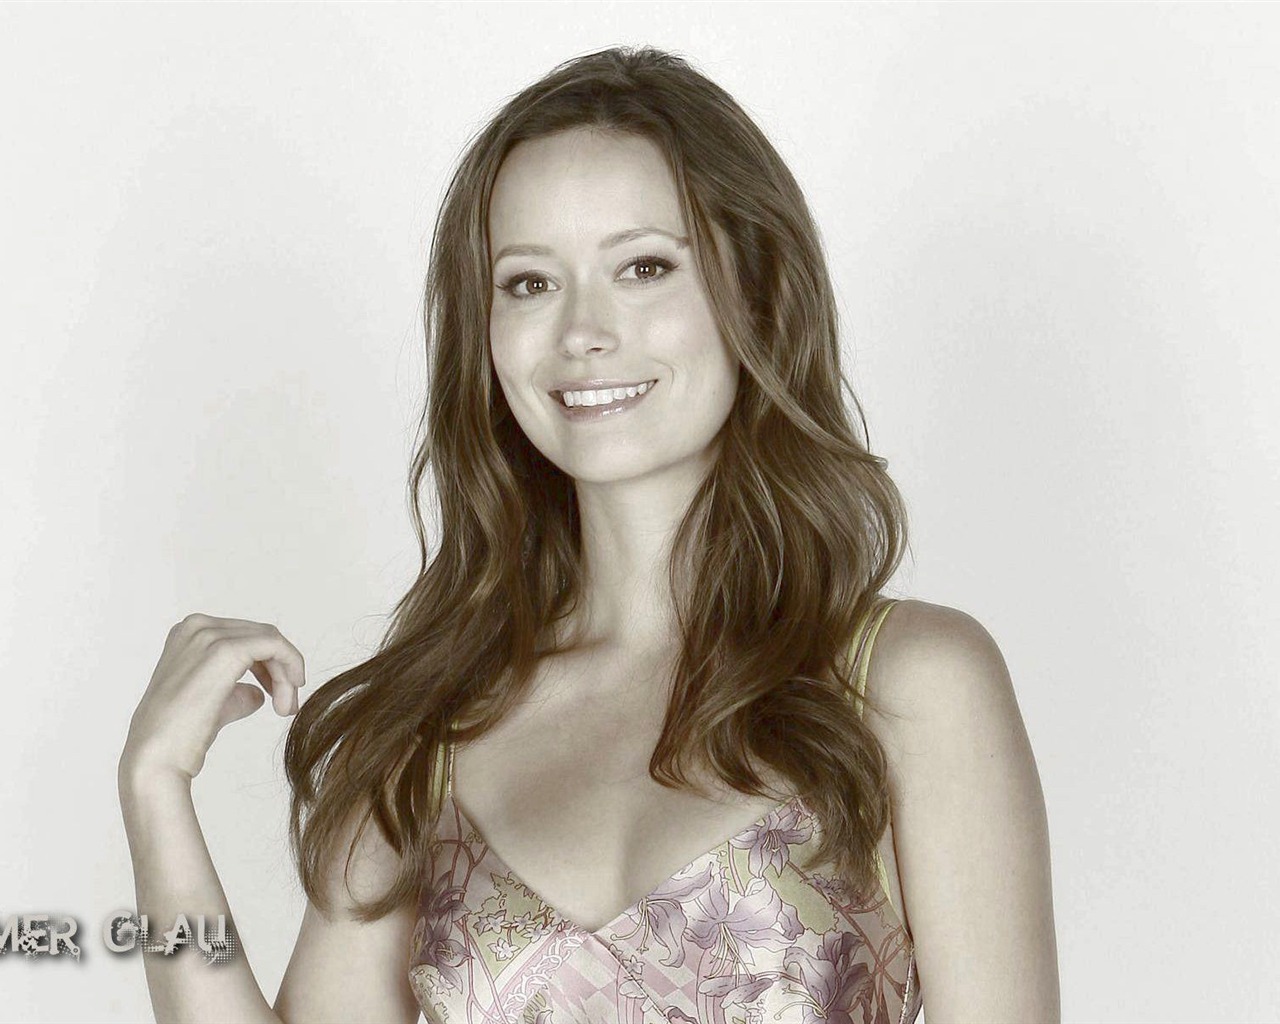 Summer Glau #011 - 1280x1024 Wallpapers Pictures Photos Images